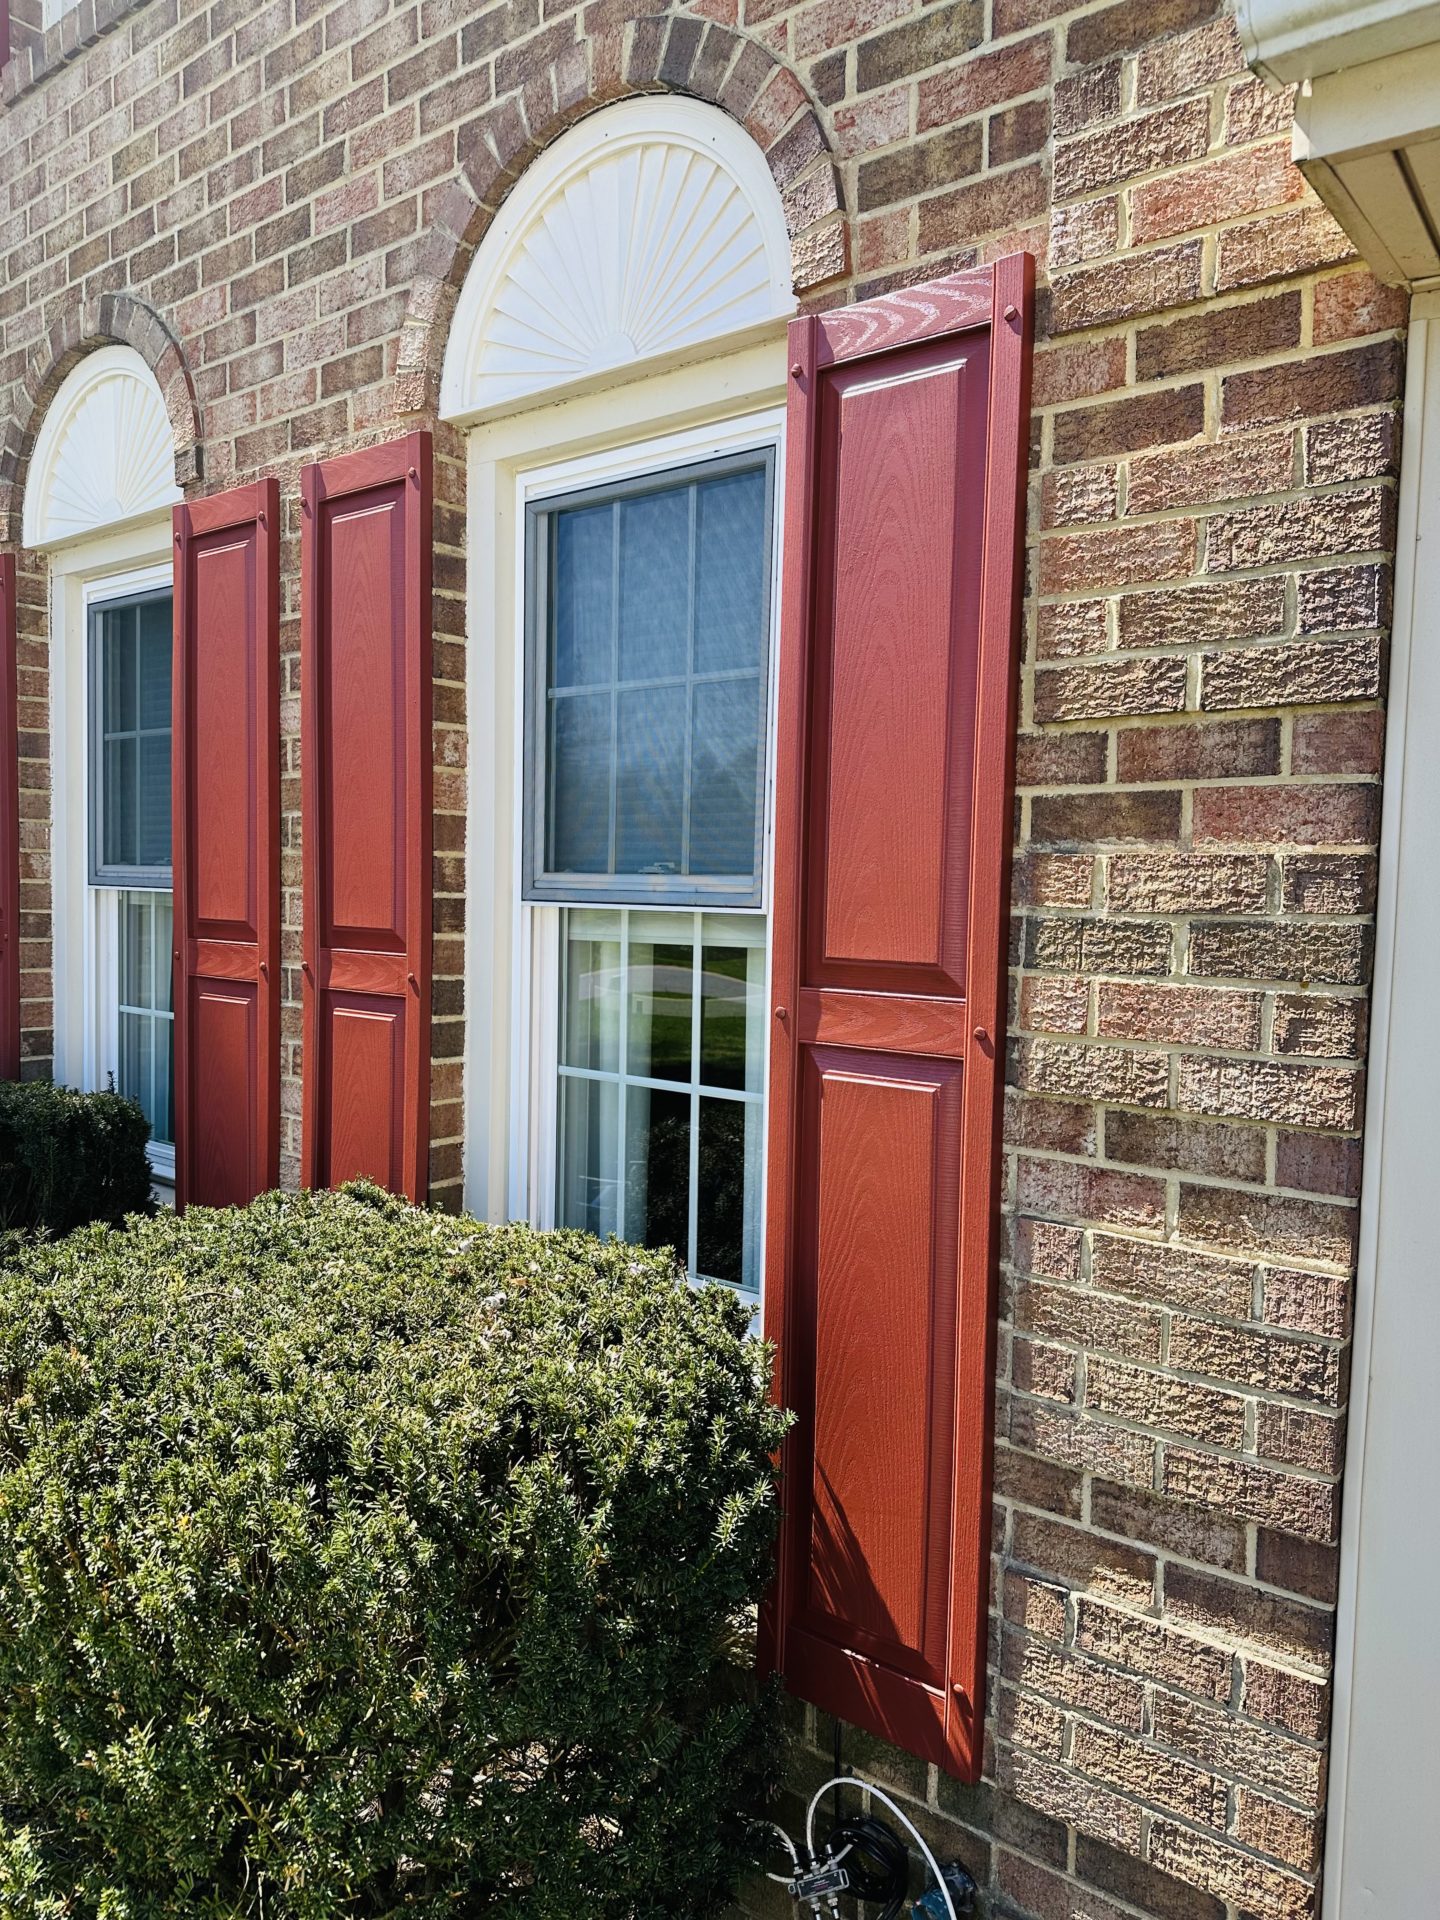 Revitalized vinyl shutters painted in a fresh coat, adding visual appeal to the home's exterior